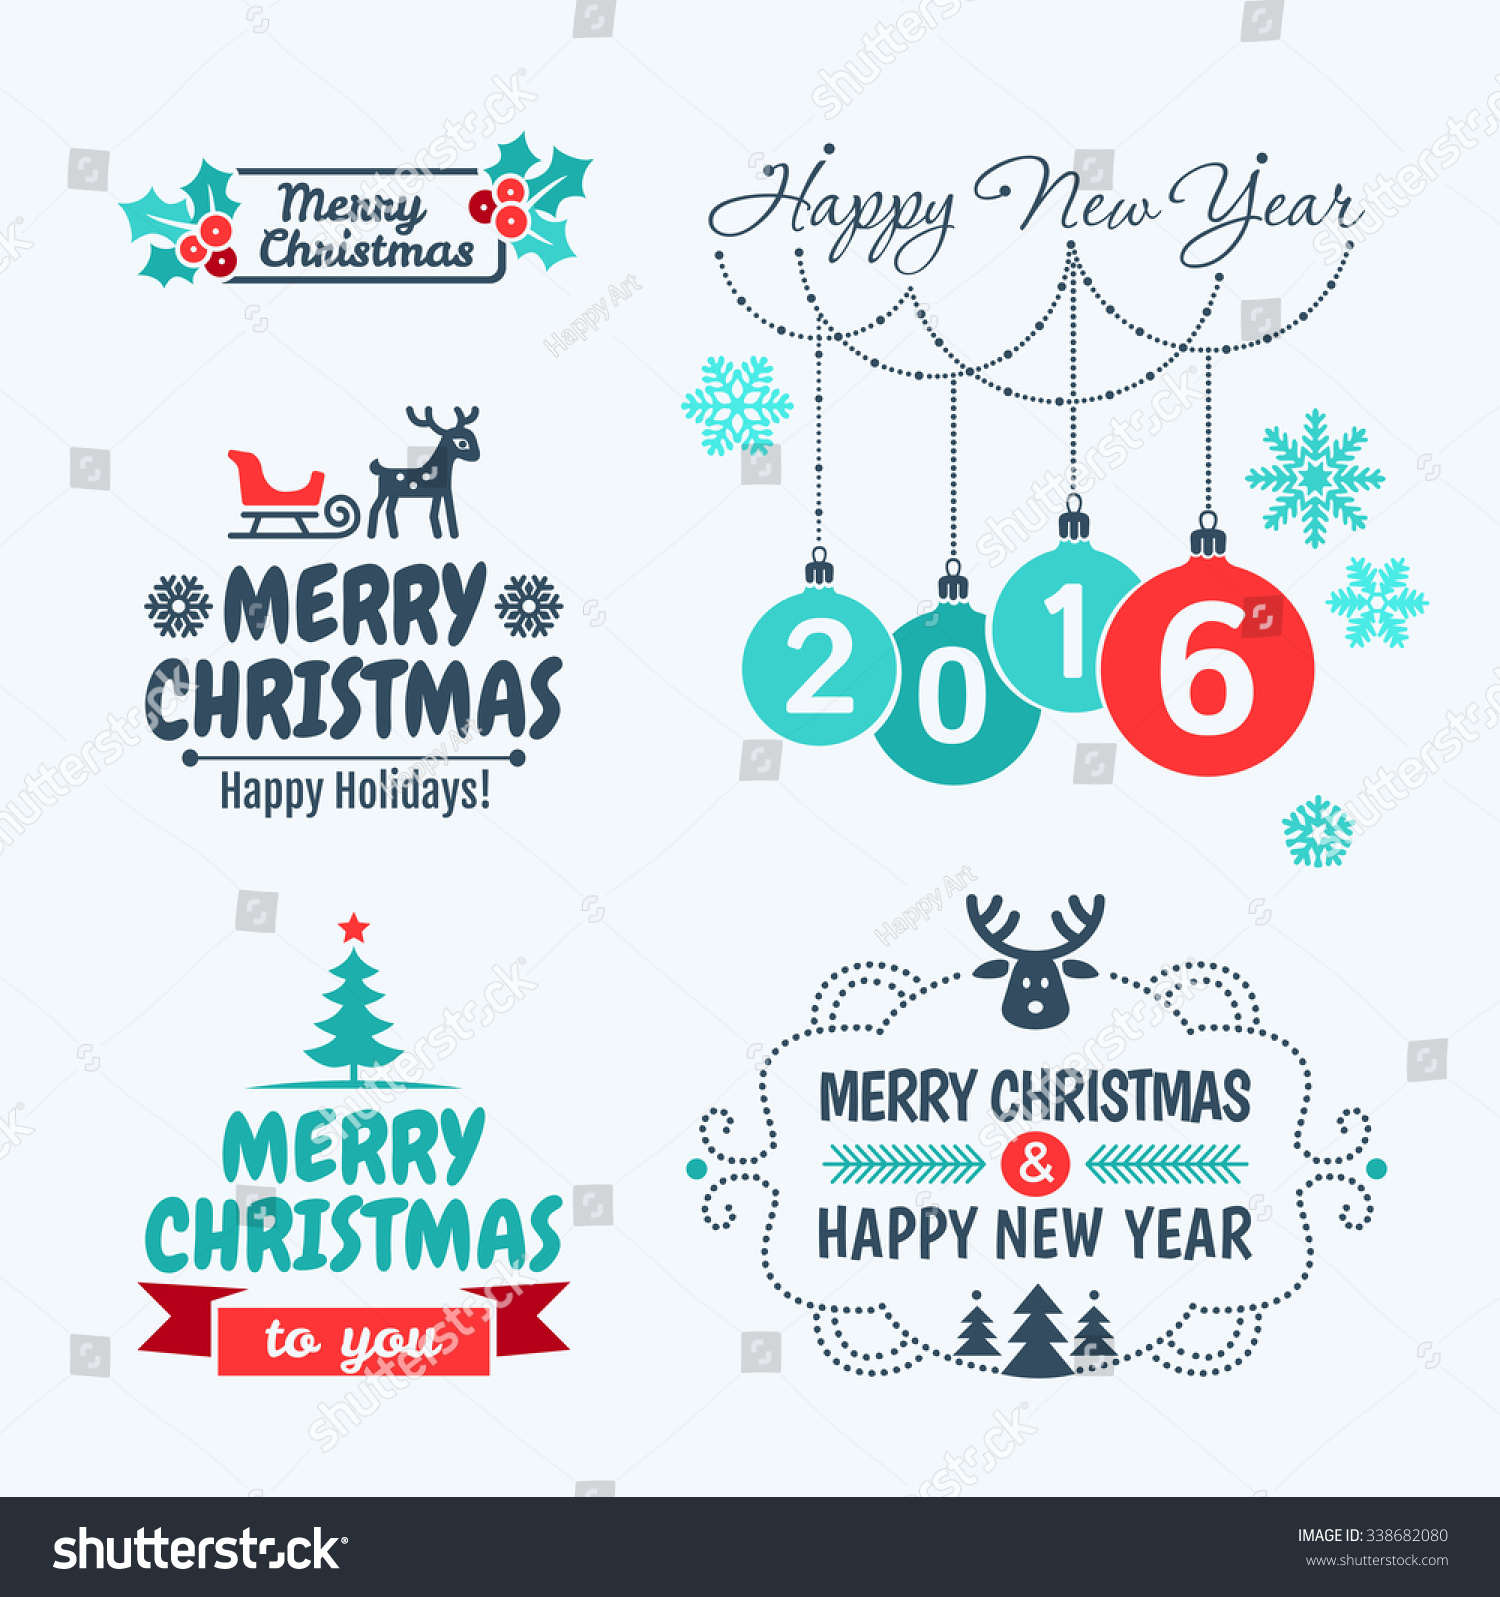 Merry Christmas and happy new year 2016 Set of typographic elements frames and vintage